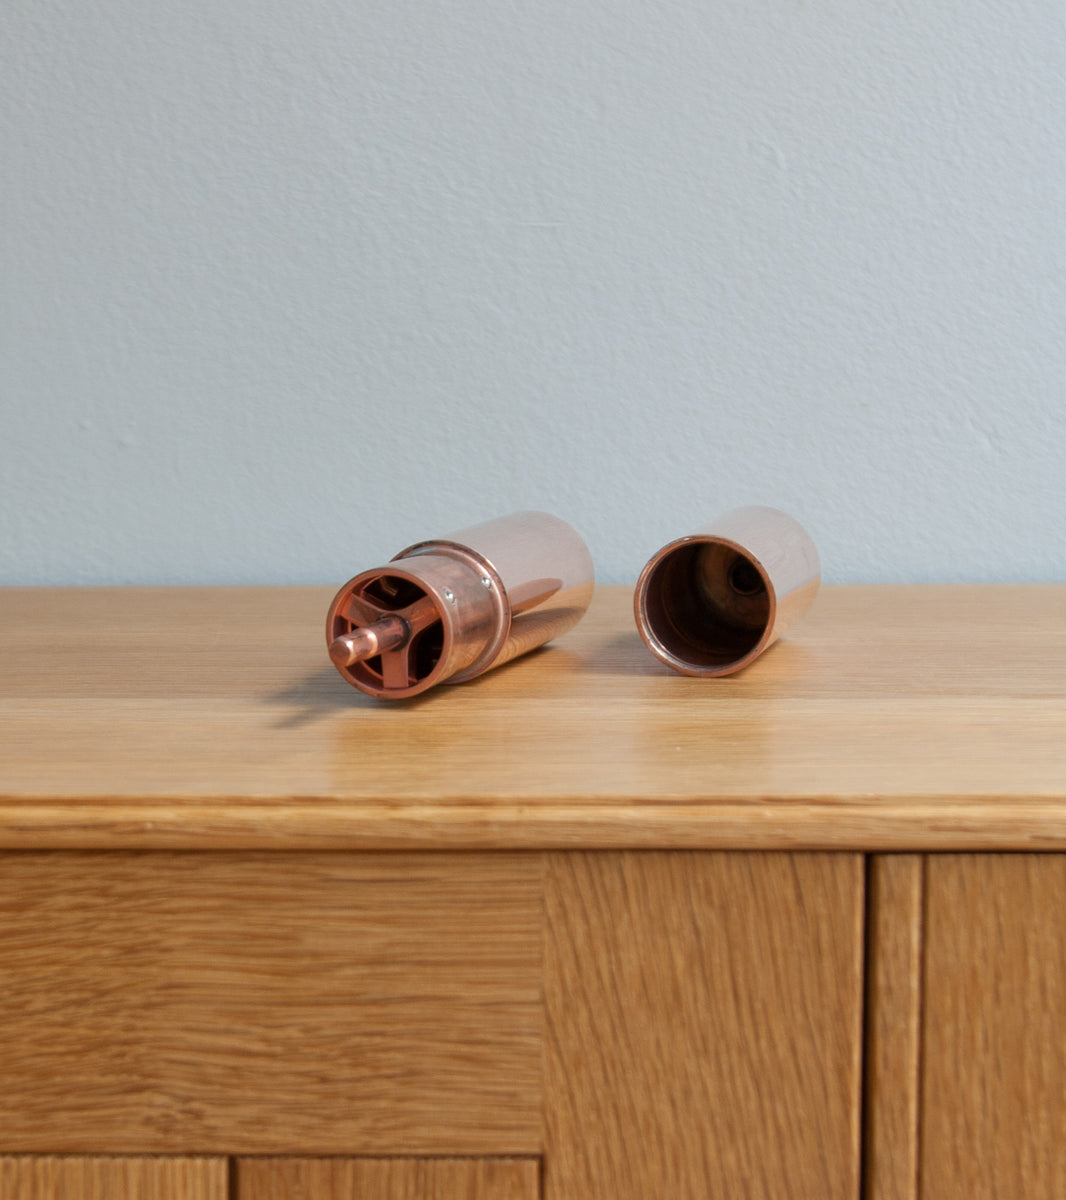 Italic Mill - Copper Plated Michael Anastassiades & Carl Auböck, New Production